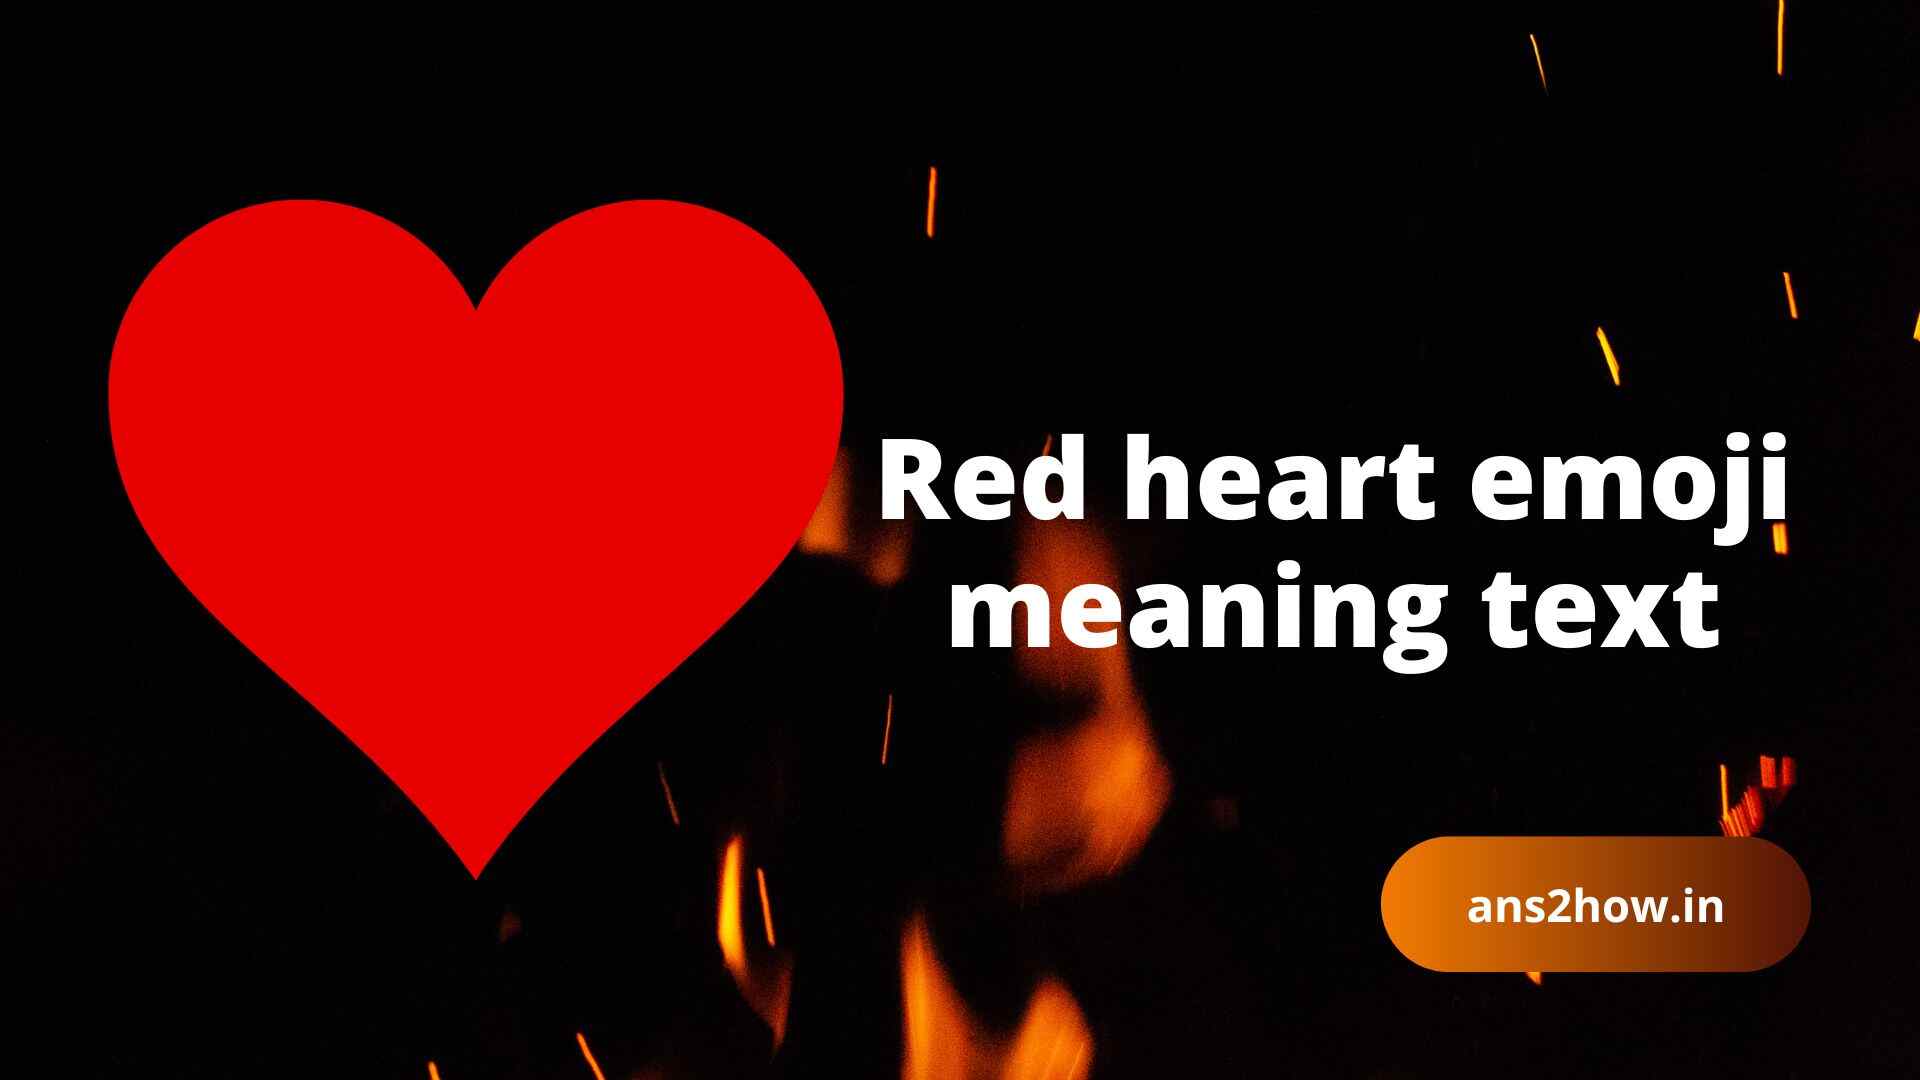 Red heart emoji meaning text